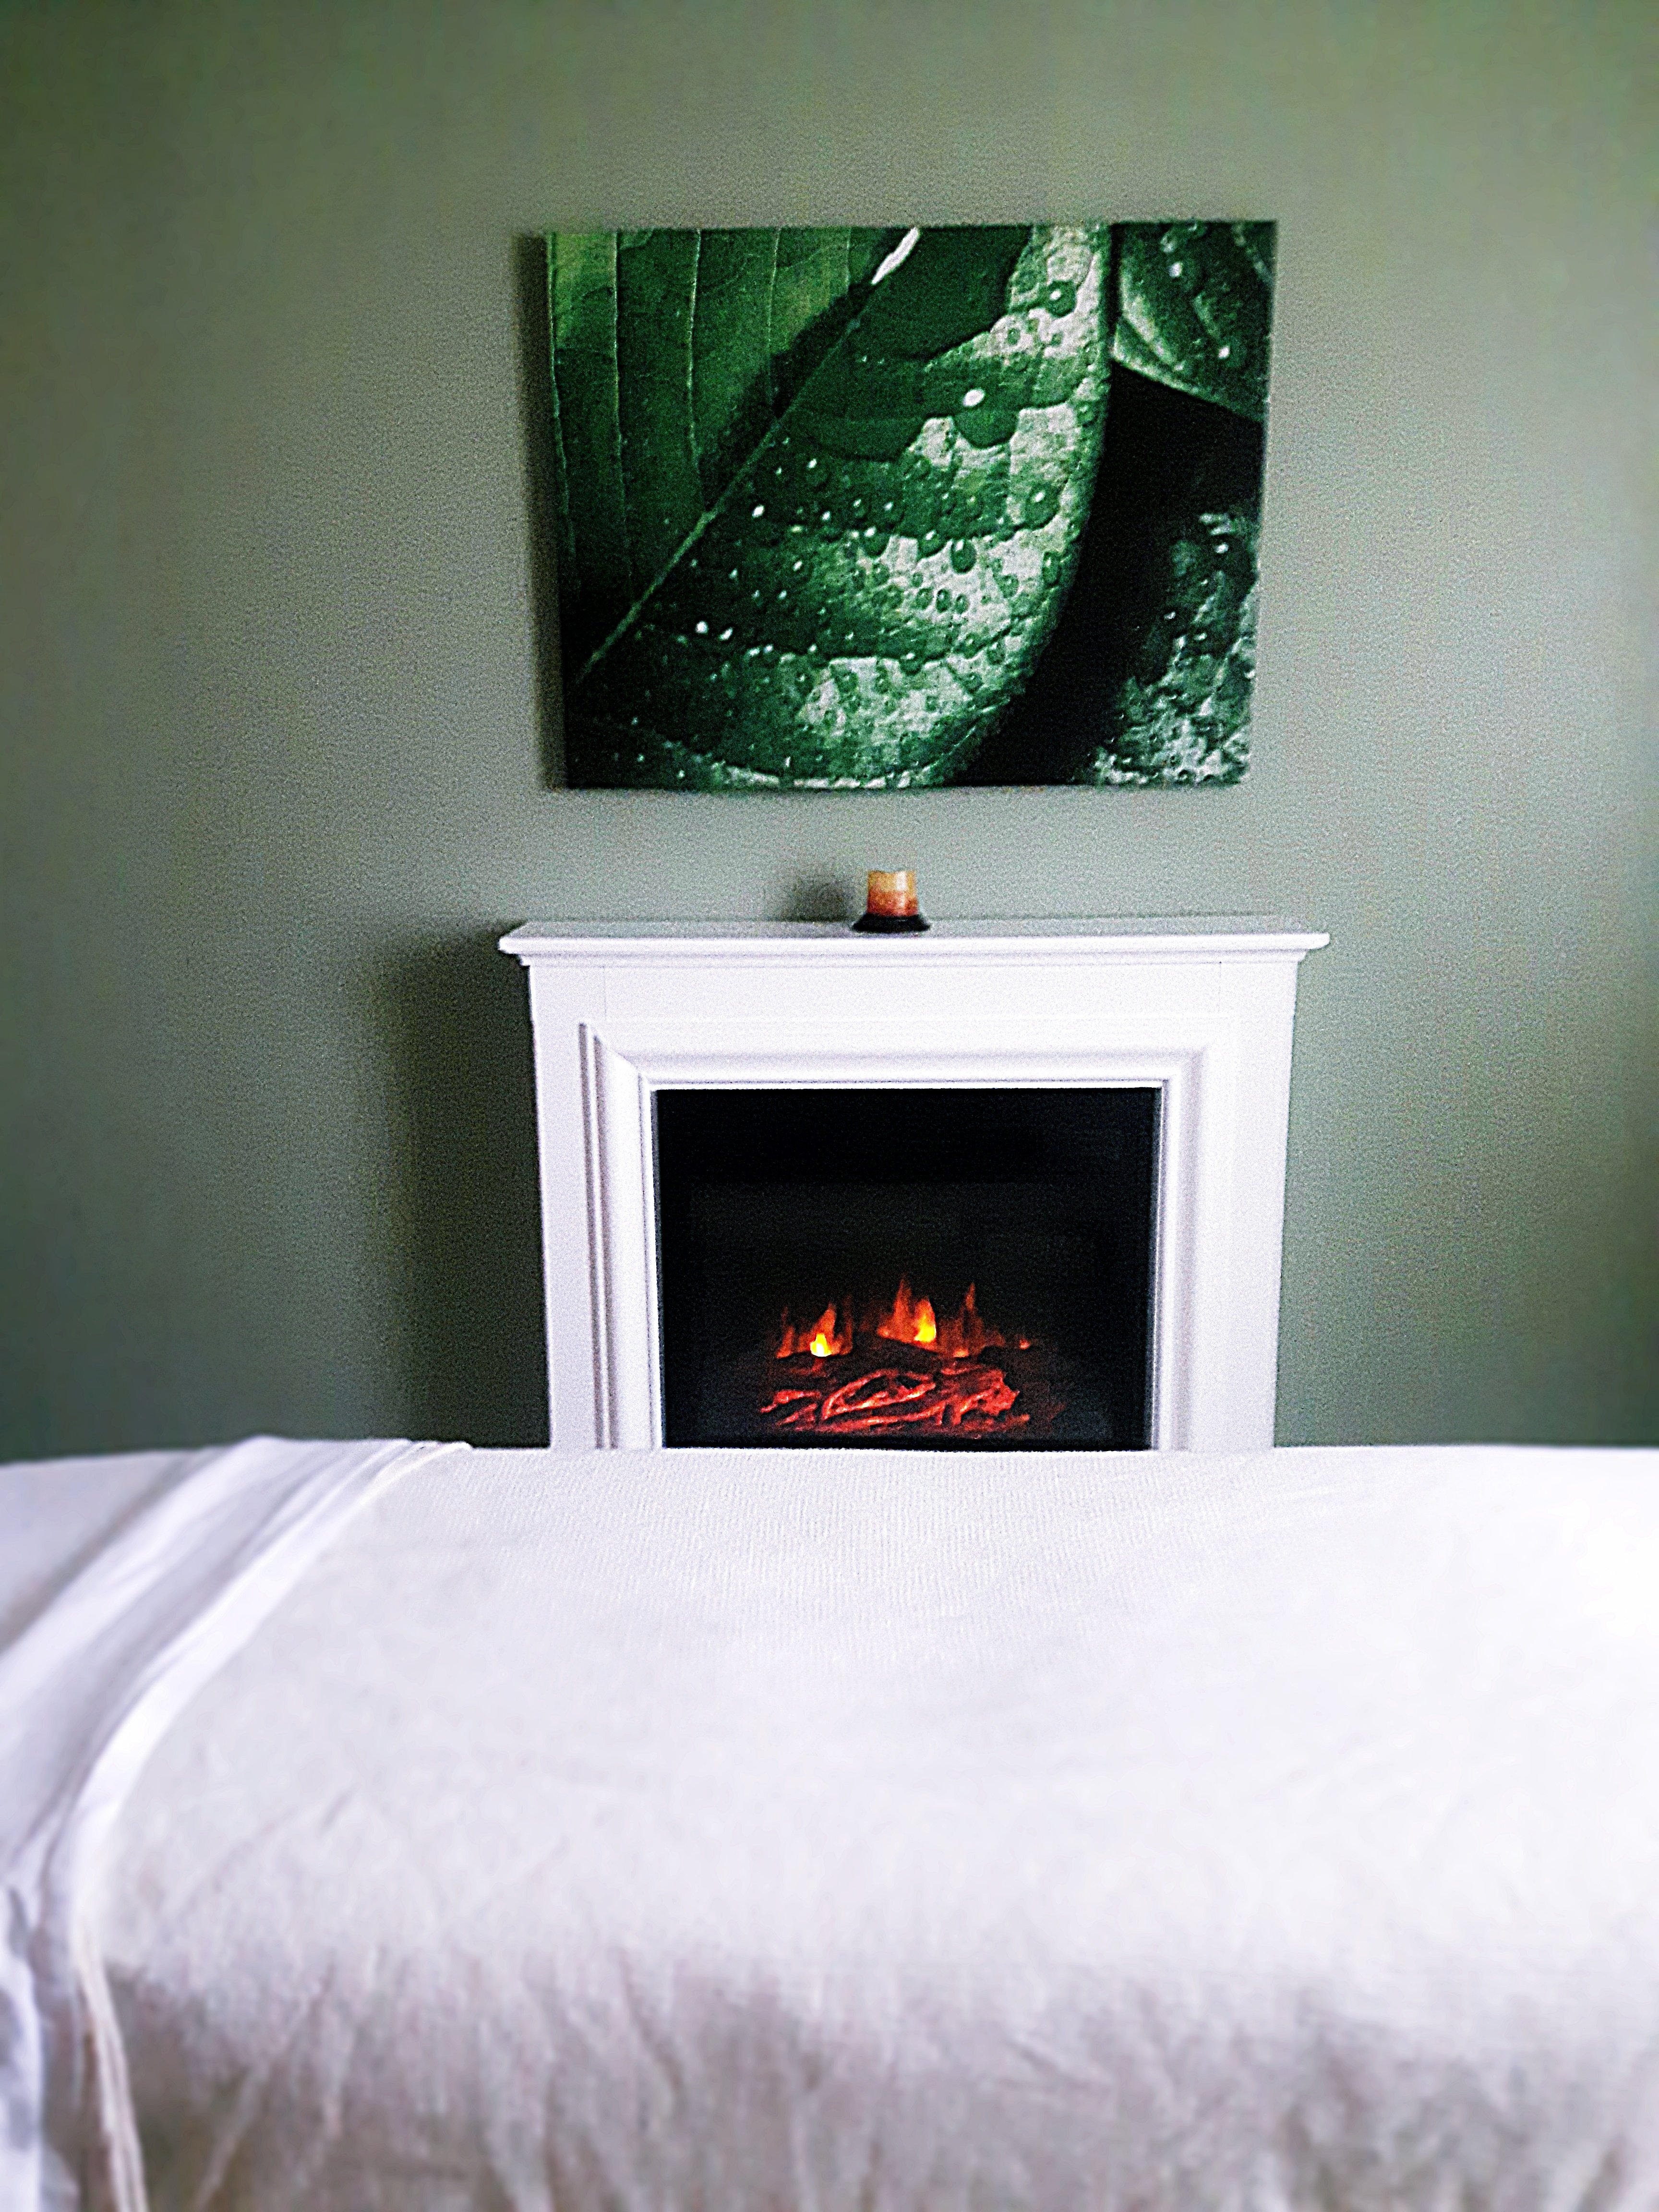 A beautiful fireplace for your enjoyment
and to warm you up on colder days